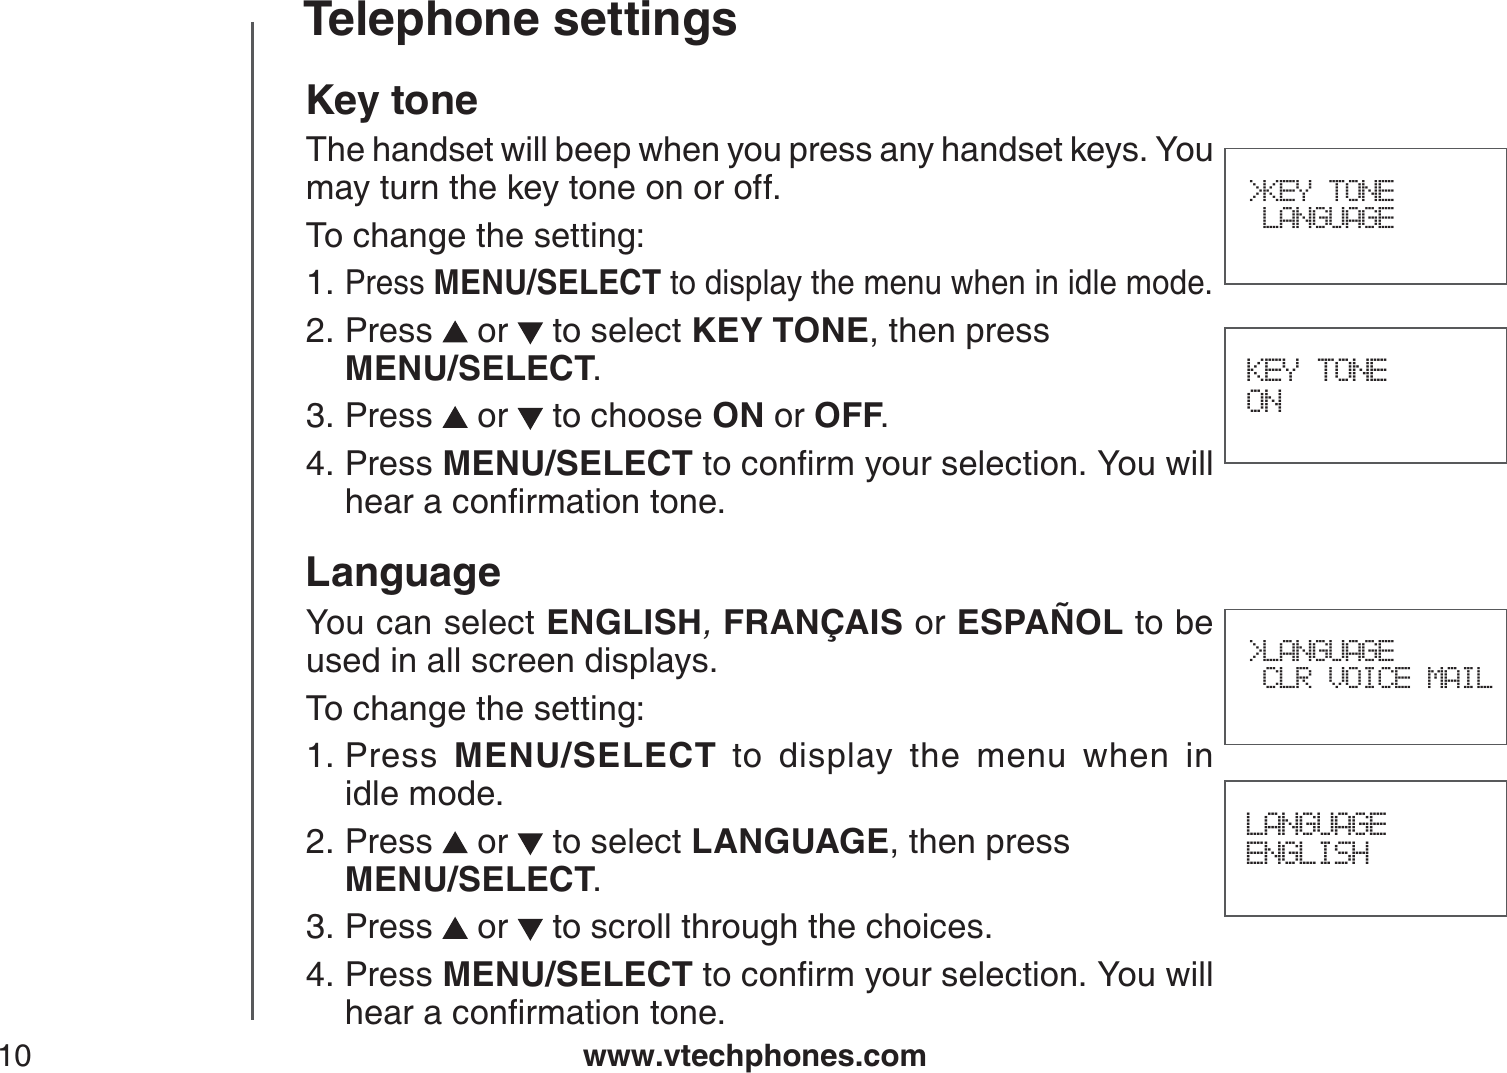 www.vtechphones.com10Telephone settings&gt;KEY TONE LANGUAGEKey toneThe handset will beep when you press any handset keys. You may turn the key tone on or off.To change the setting:Press MENU/SELECT to display the menu when in idle mode.Press  or   to select KEY TONE, then press    MENU/SELECT.Press   or   to choose ON or OFF.Press MENU/SELECTVQEQPſTO[QWTUGNGEVKQP;QWYKNNJGCTCEQPſTOCVKQPVQPGLanguageYou can select ENGLISH,FRANÇAIS or ESPAÑOL to be used in all screen displays.To change the setting:Press MENU/SELECT to display the menu when in           idle mode.Press  or   to select LANGUAGE, then press    MENU/SELECT.Press   or   to scroll through the choices.Press MENU/SELECTVQEQPſTO[QWTUGNGEVKQP;QWYKNNJGCTCEQPſTOCVKQPVQPG1.2.3.4.1.2.3.4. KEY TONE ONLANGUAGEENGLISH&gt;LANGUAGE CLR VOICE MAIL